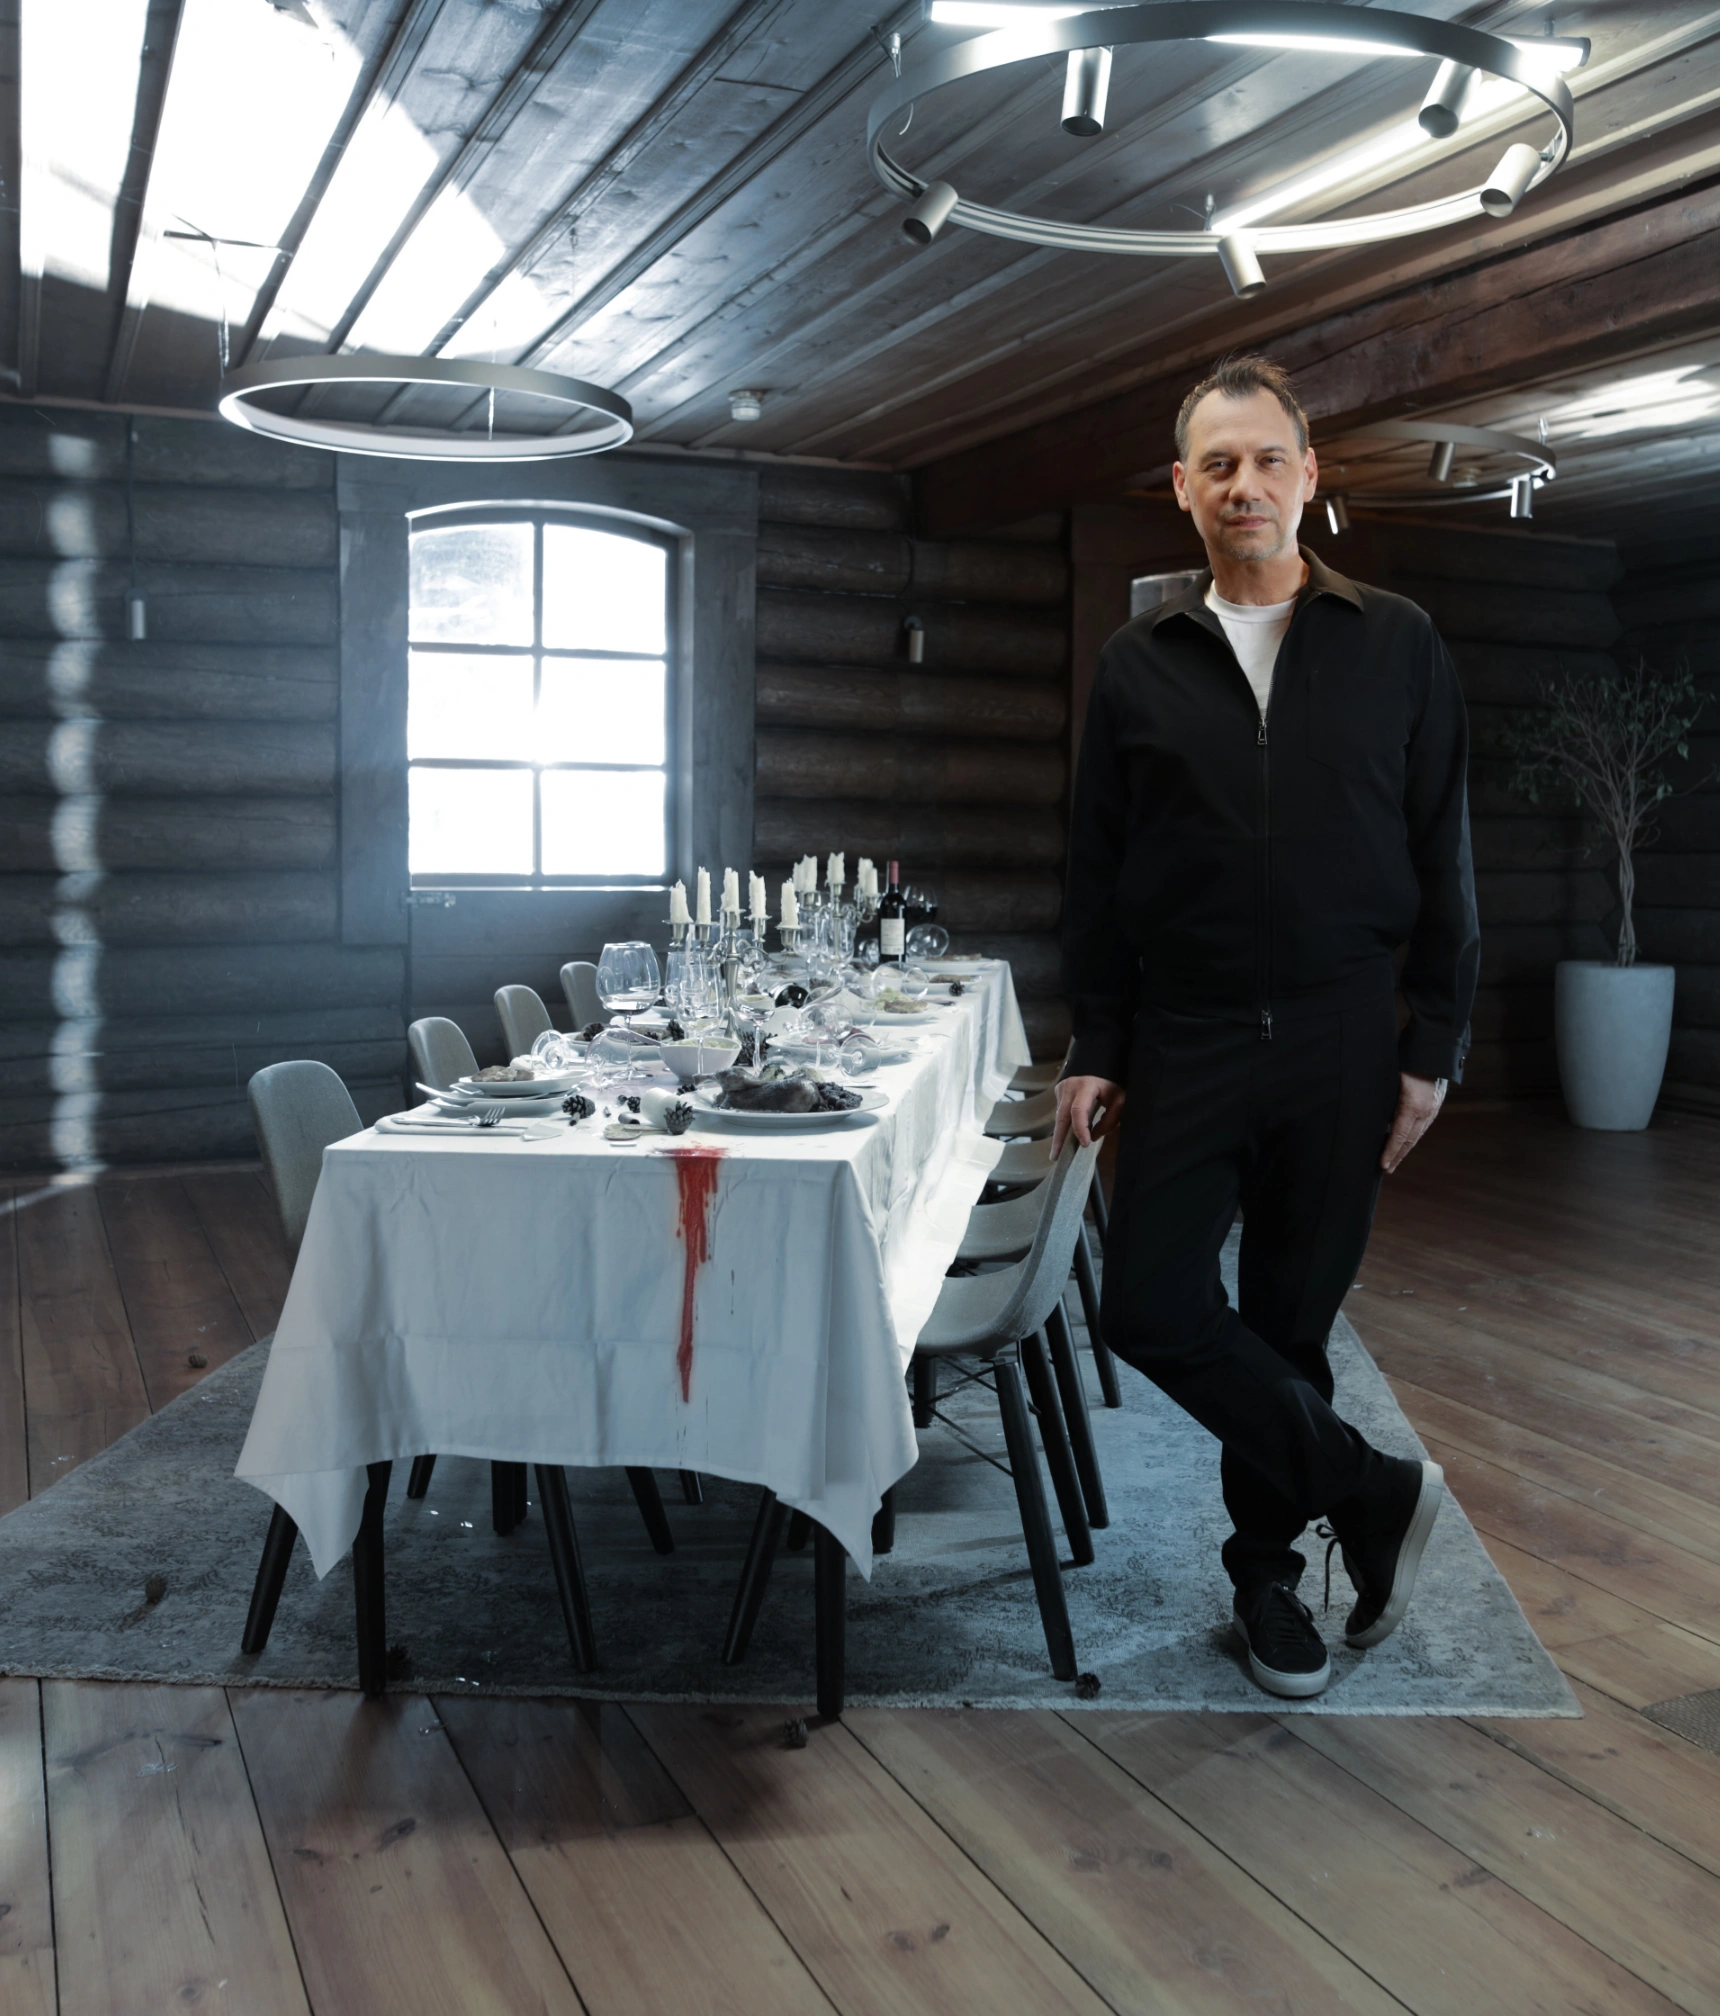 A picture shows Sebastian Fitzek in front of a laid table.